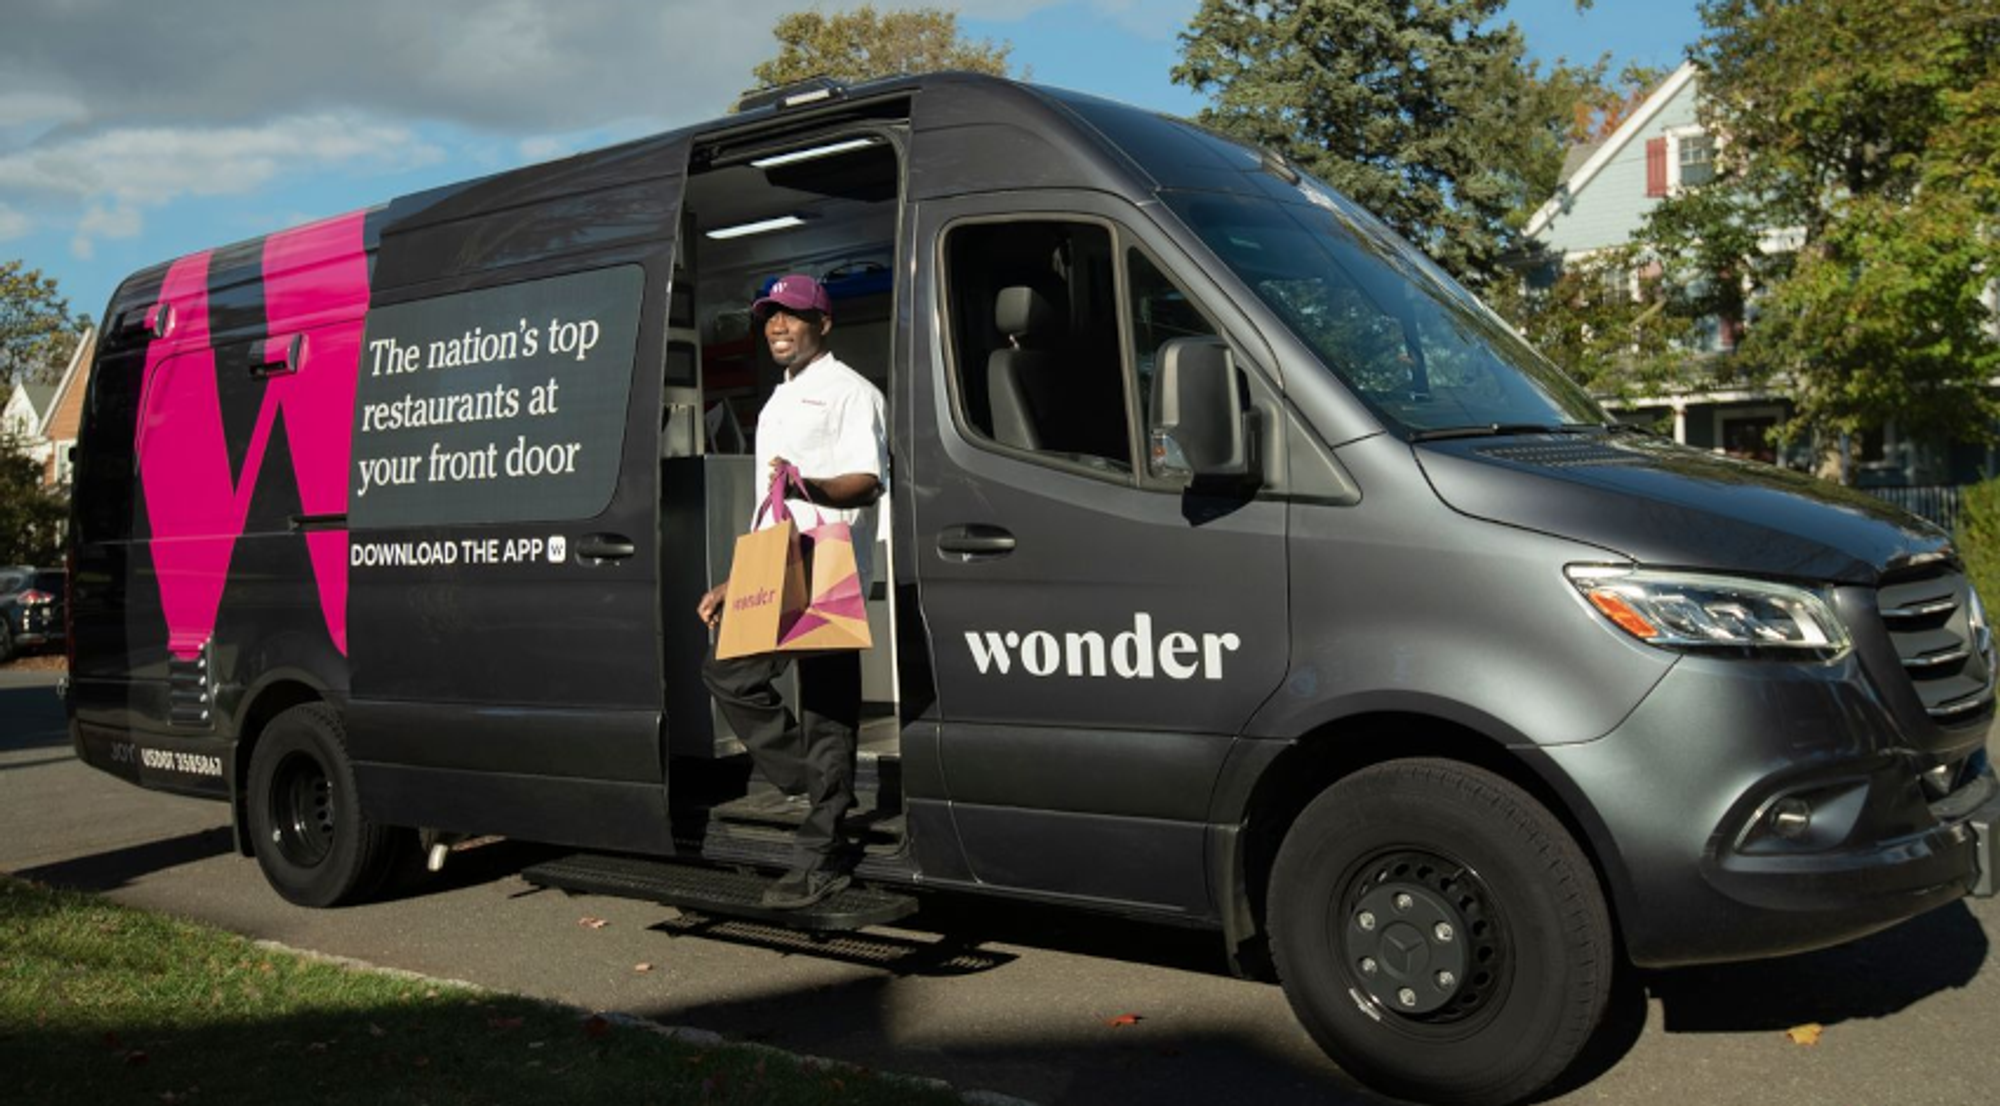 Report: Food delivery startup Wonder valued at $3.5B after $350M funding round - SiliconANGLE